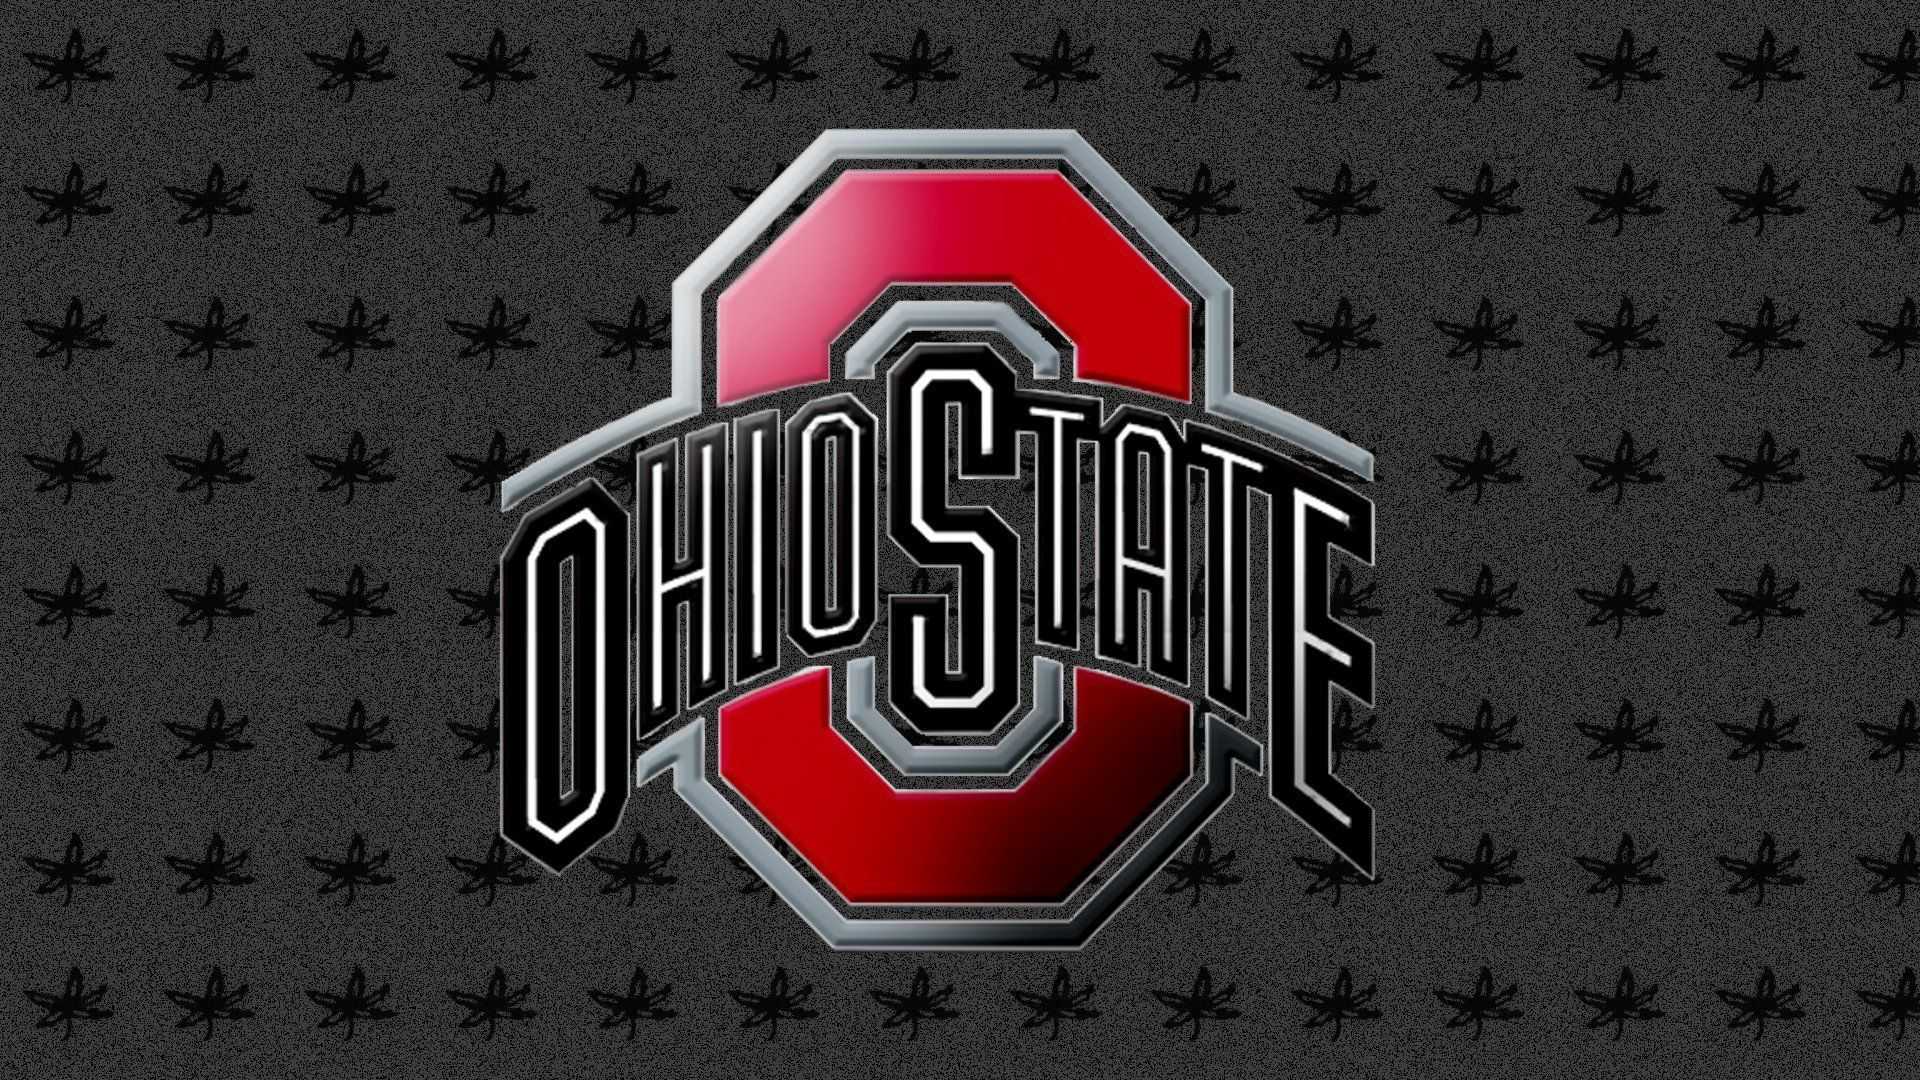 Full HD For Ohio State Buckeyes Football Wallpaper Best High Quality